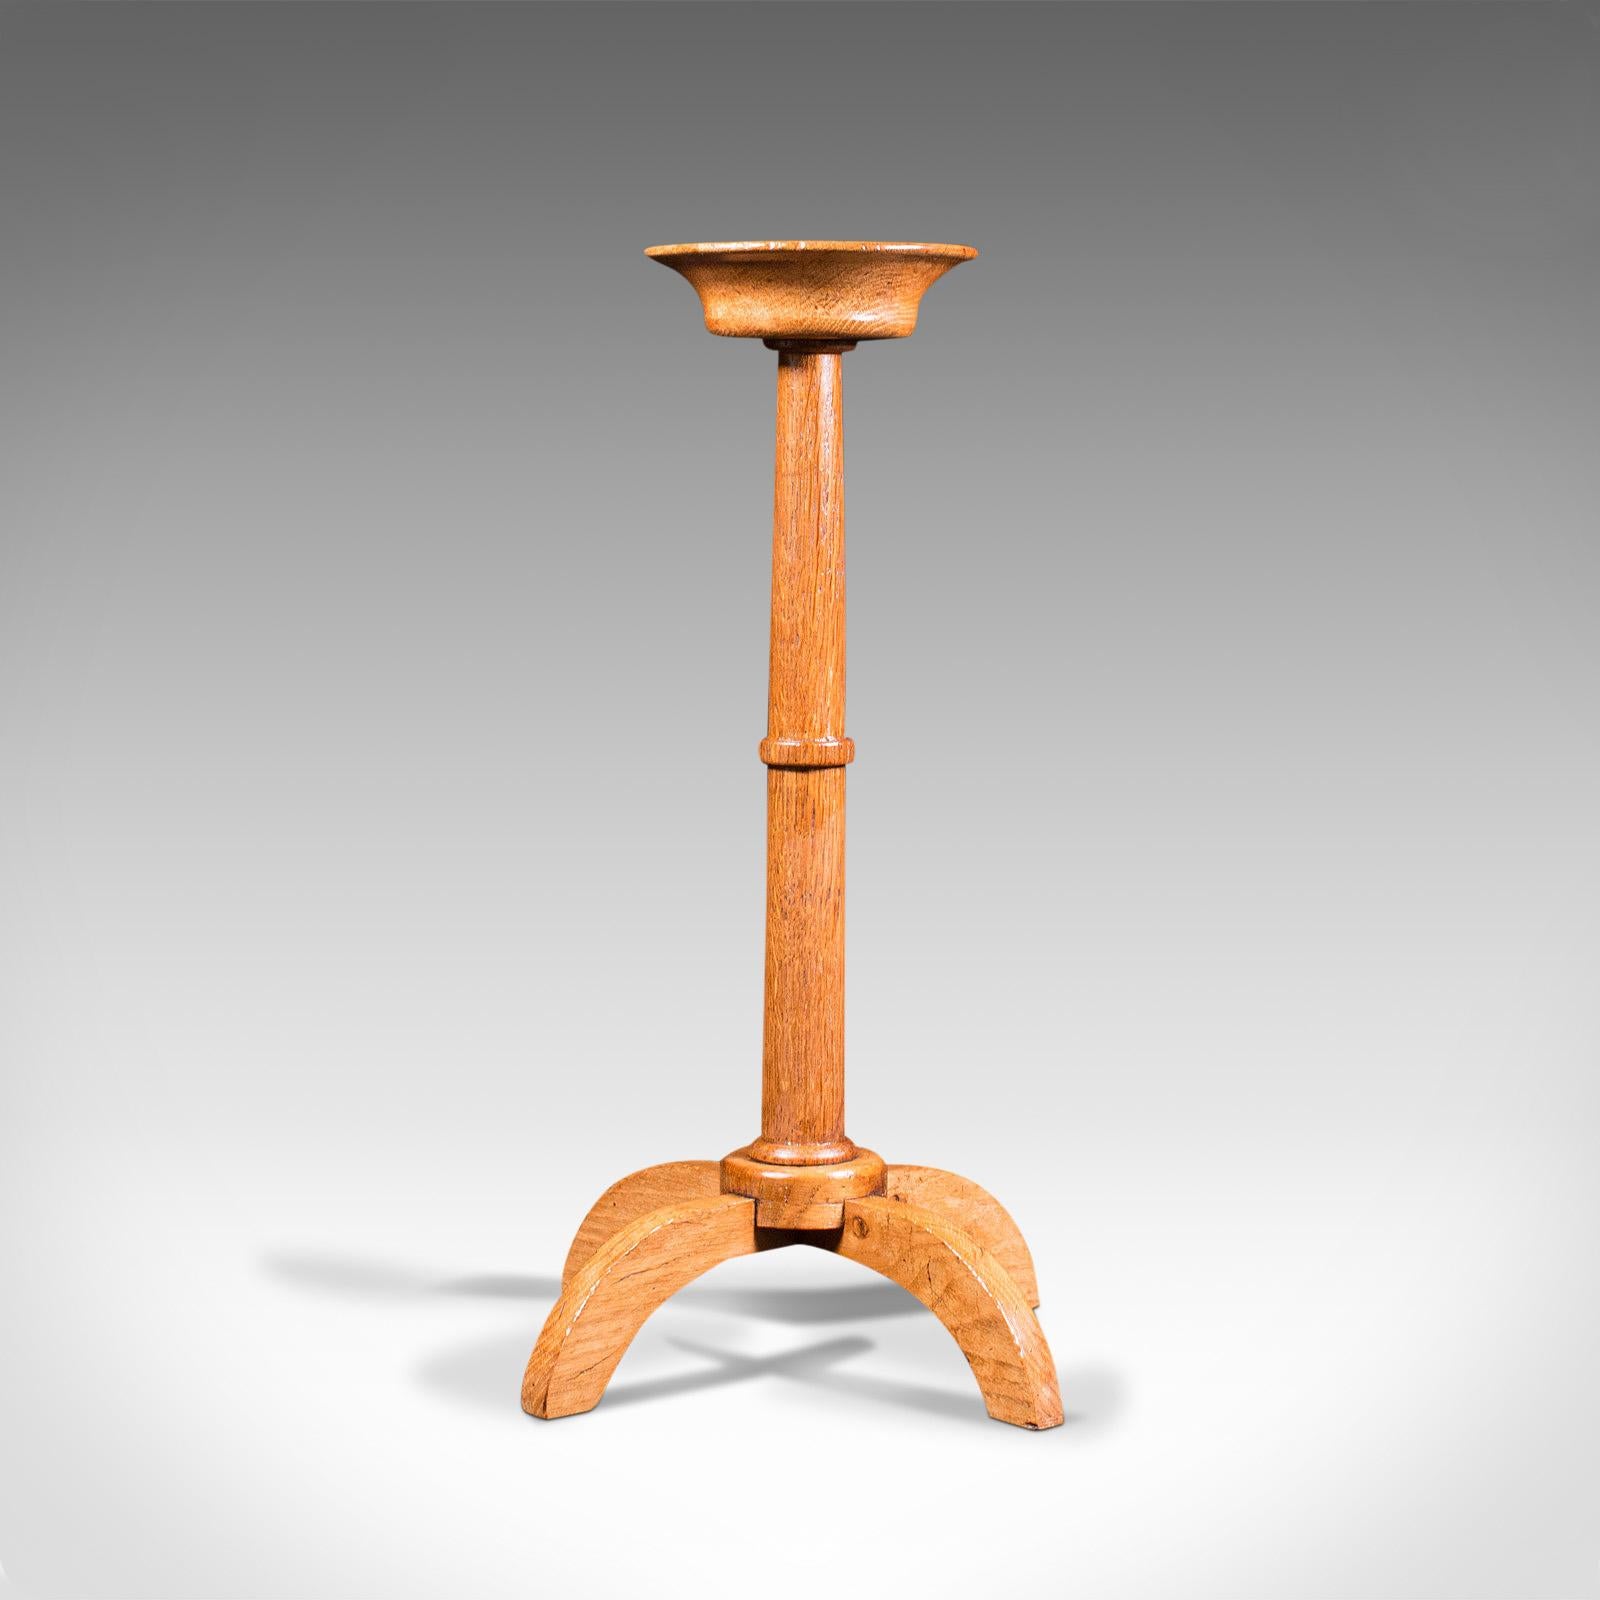 This is an antique torchere. An English, oak candle stand in the manner of the Cotswold school or Arts & Crafts movement with ecclesiastical overtones, dating to the early 20th century, circa 1920.

Appealing light oak hues and attractive